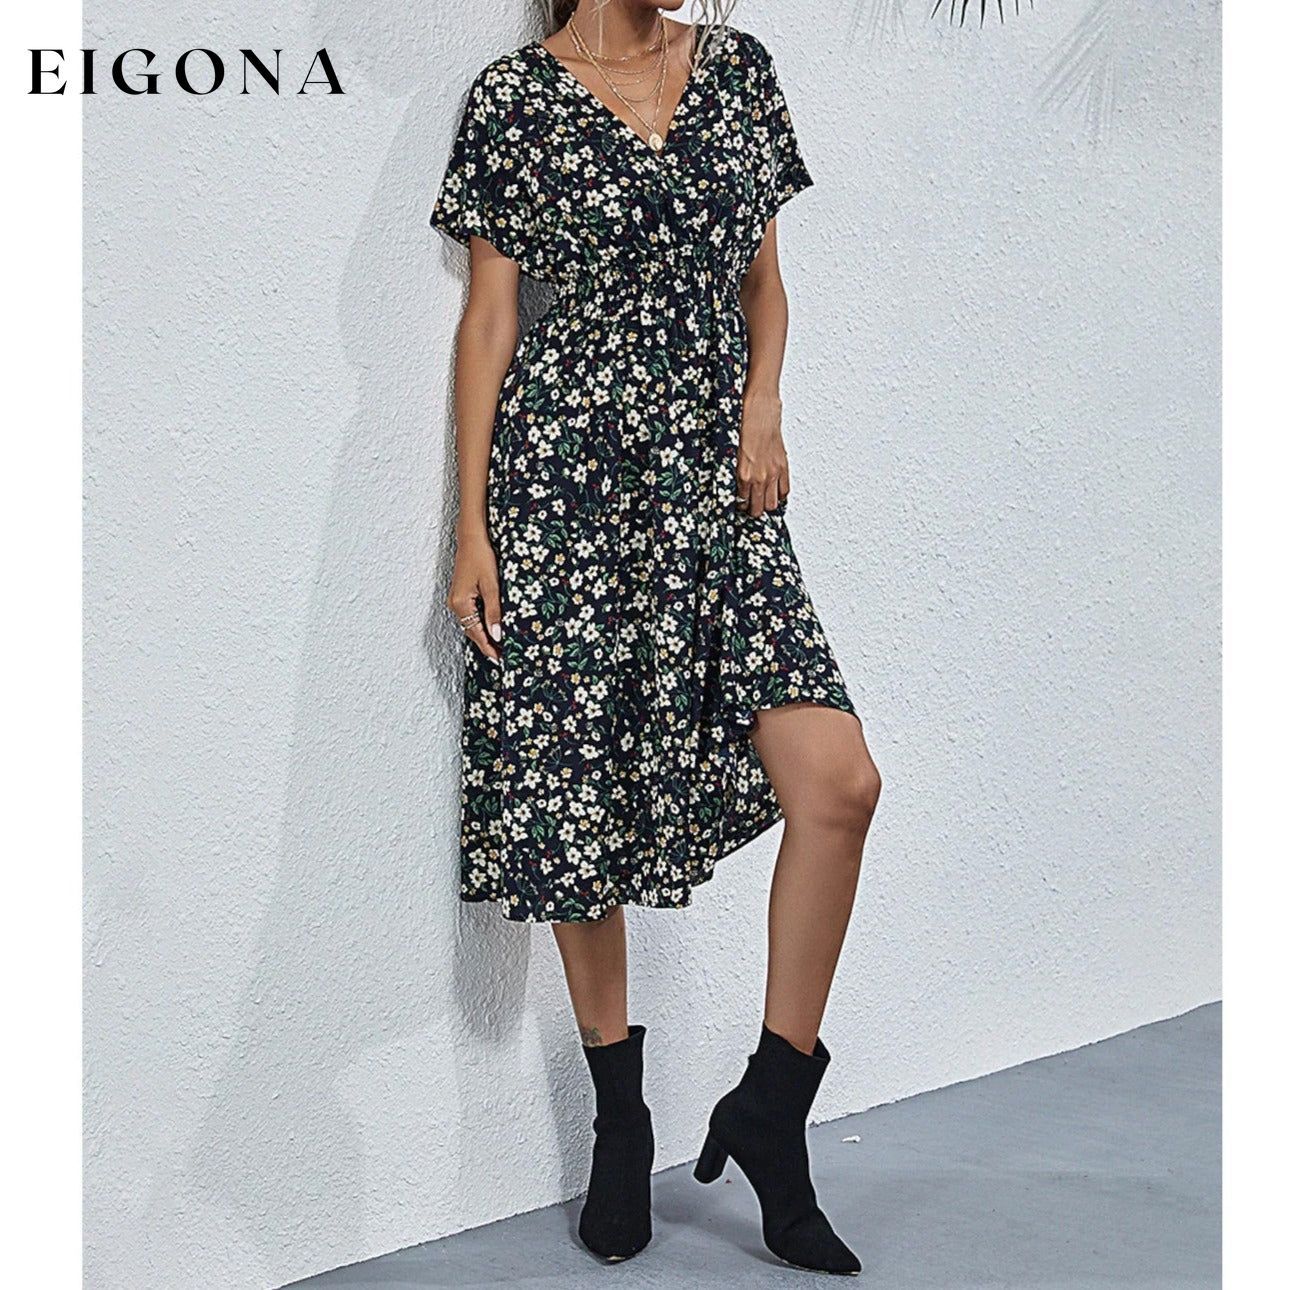 Women's V Neck Casual Boho Loose Midi Dress Black __stock:200 casual dresses clothes dresses refund_fee:1200 show-color-swatches